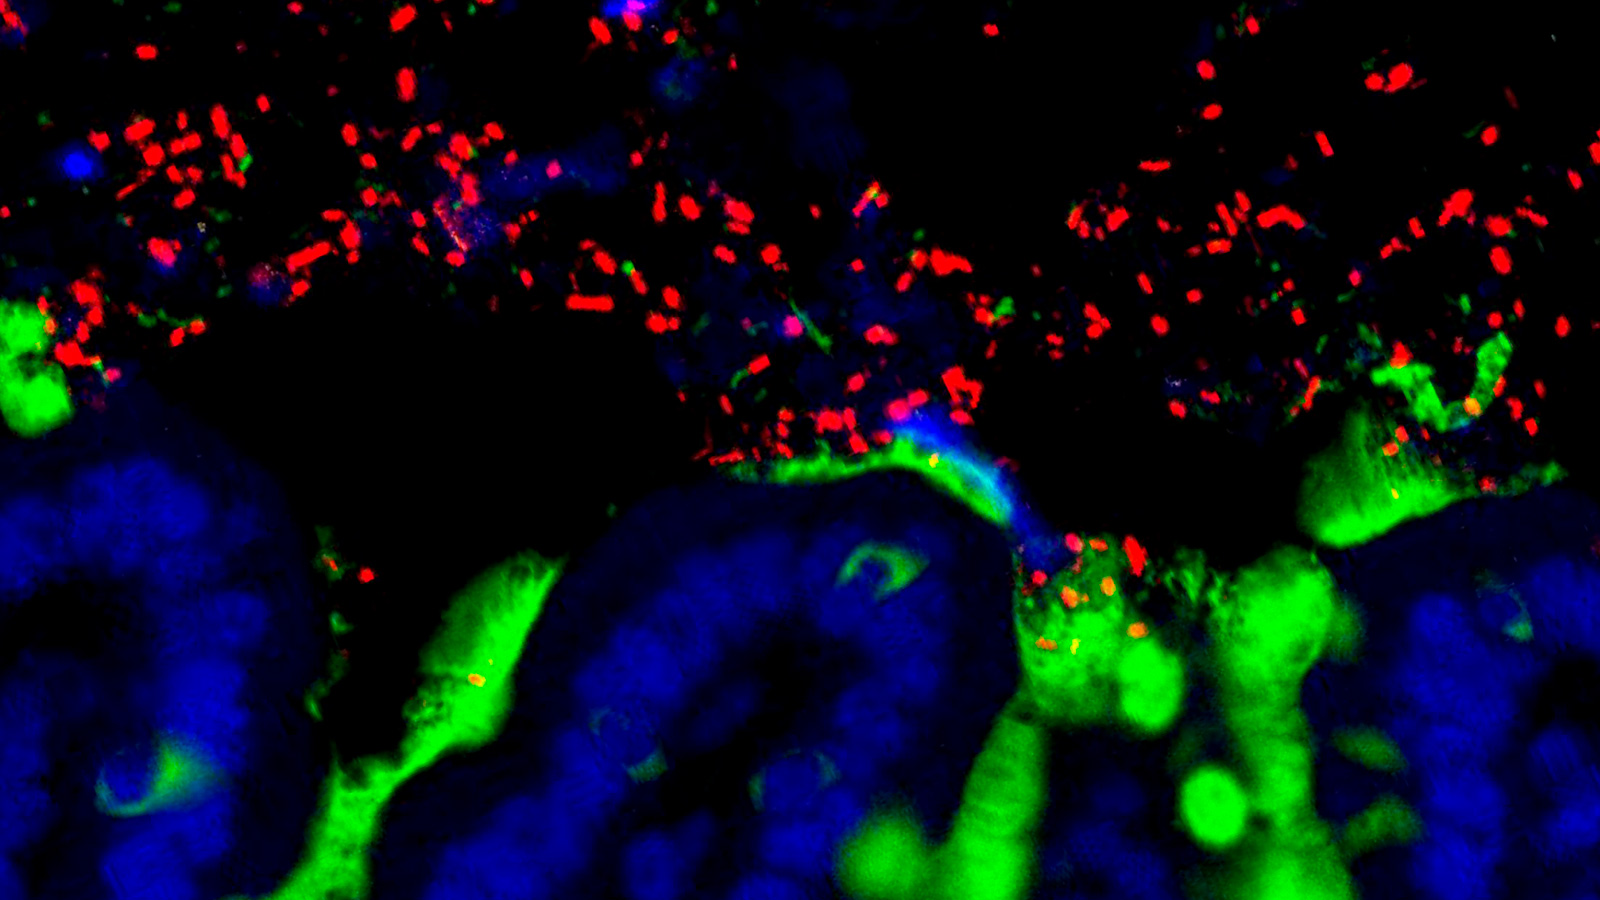 Commensal bacteria (red) reside amongst the mucus (green) and epithelial cells (blue) of a mouse small intestine. (Image courtesy of UChicago.)